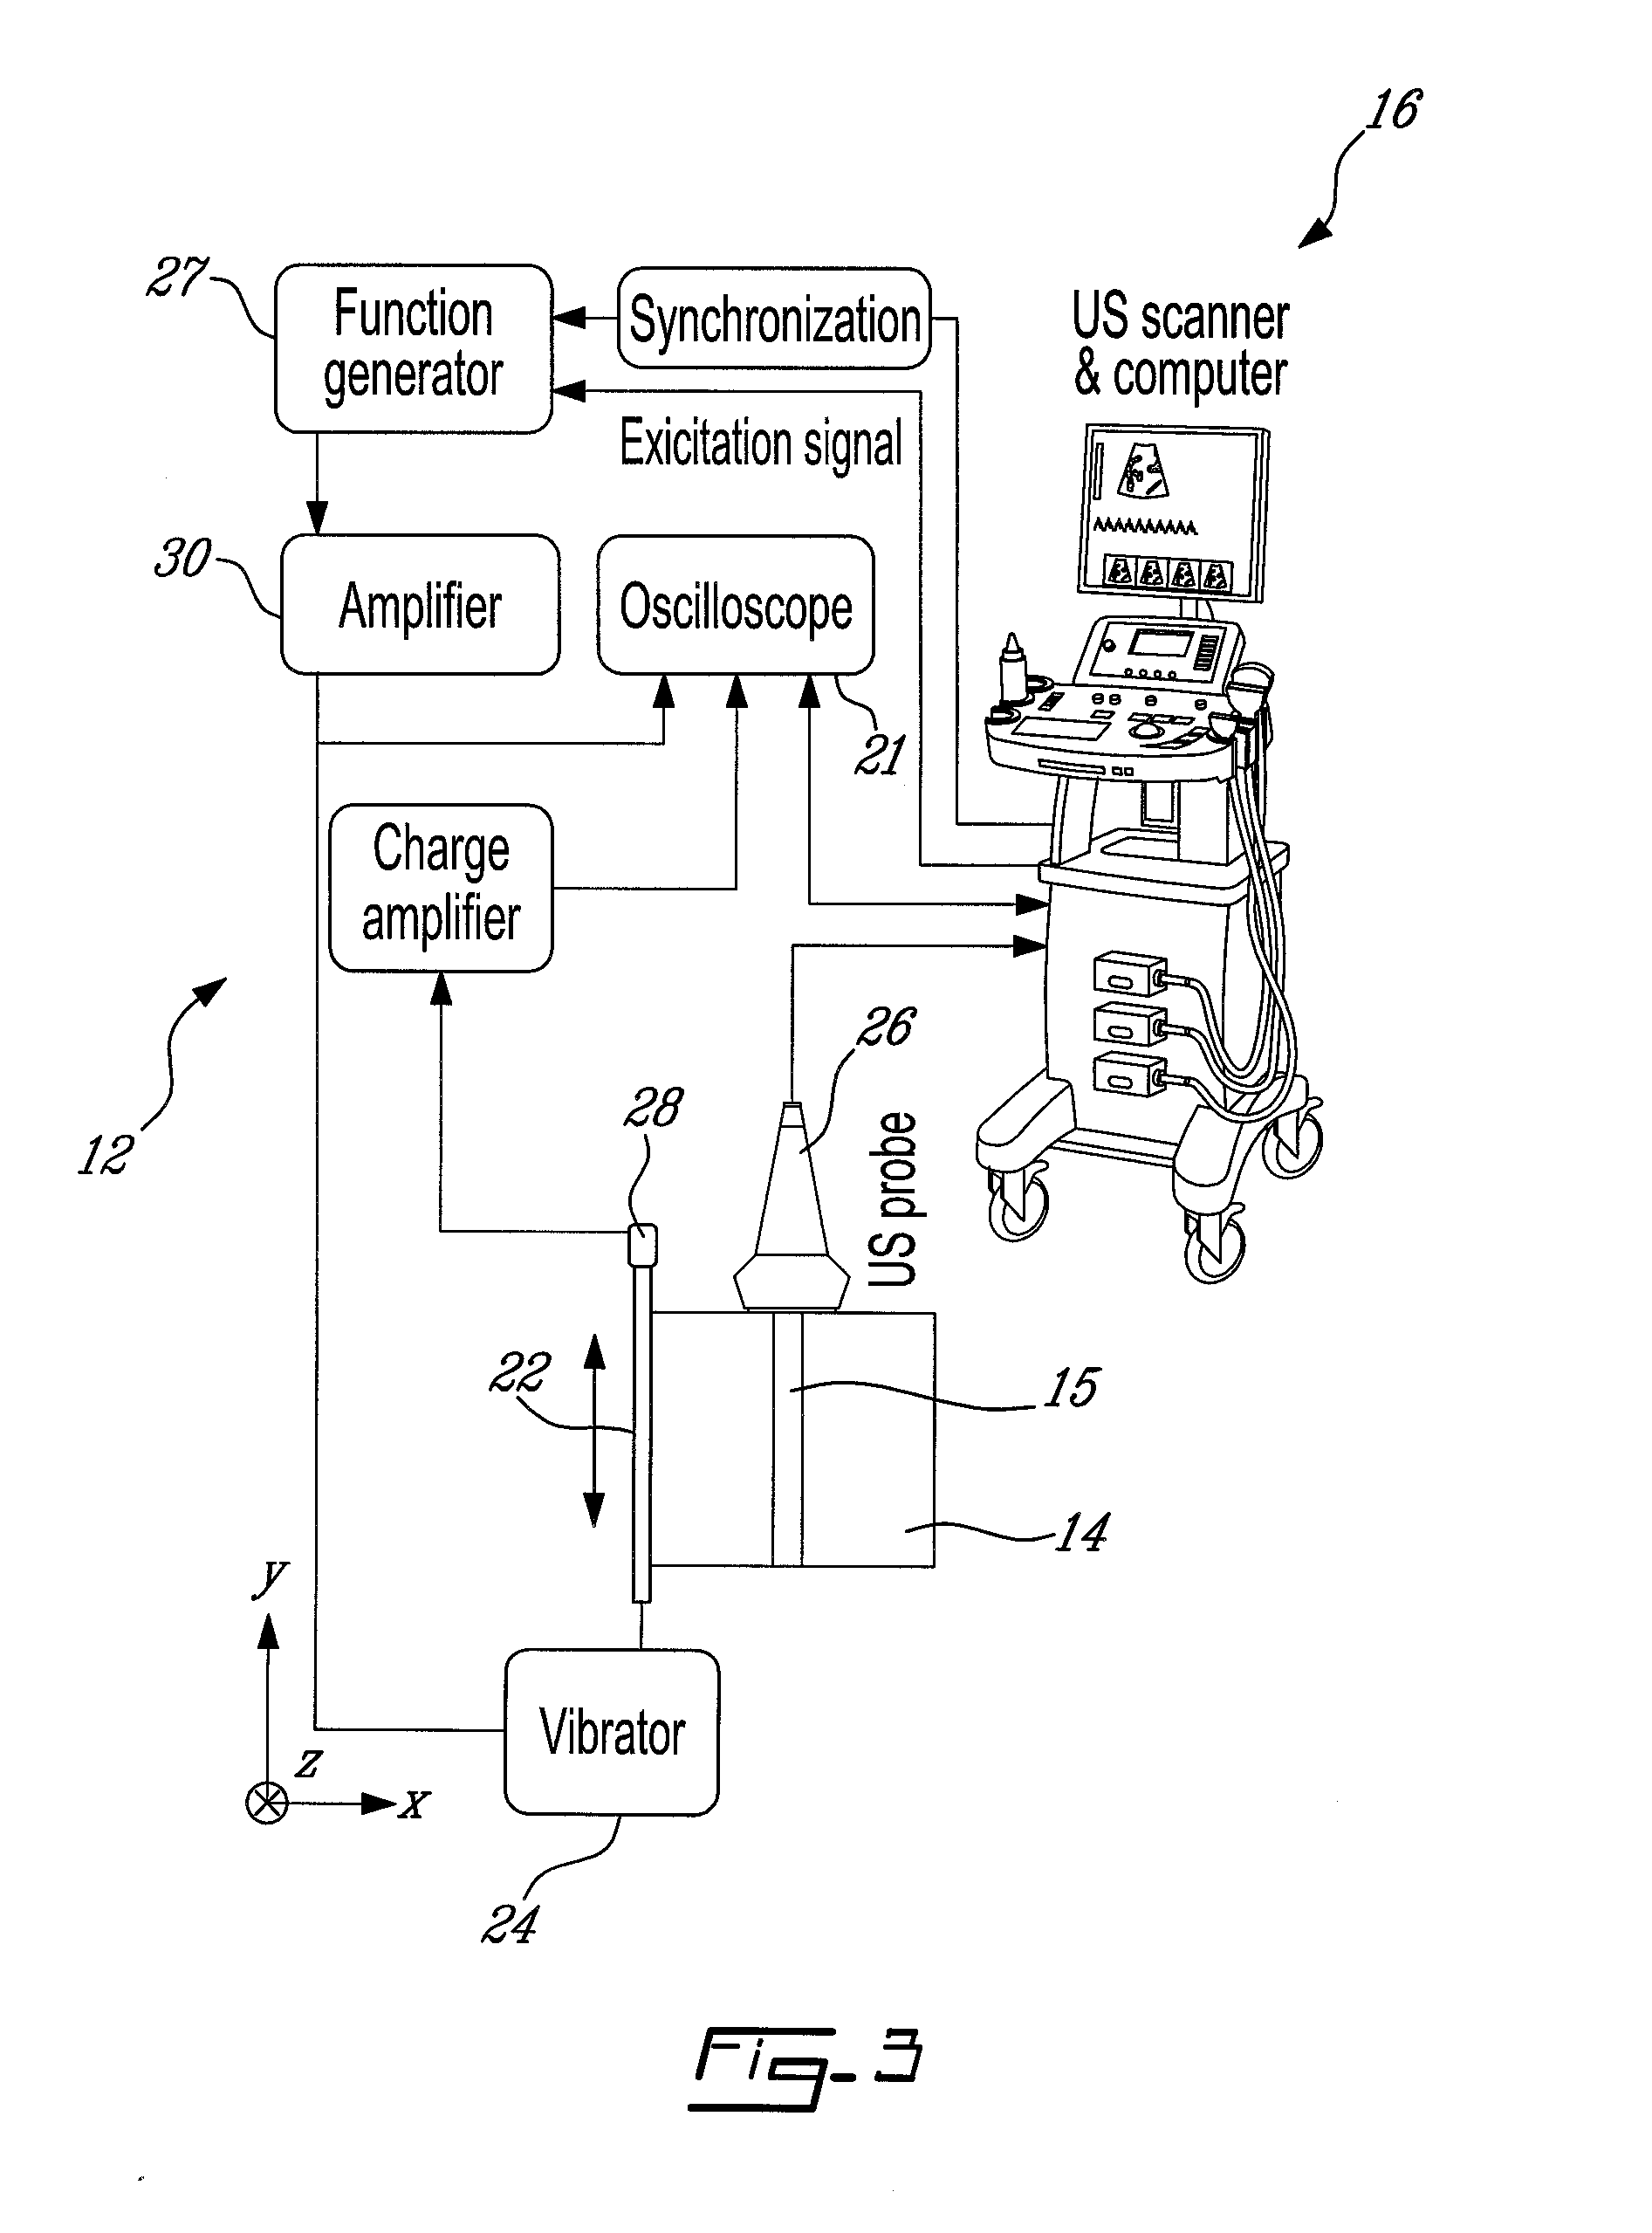 System and method for detection, characterization and imaging of heterogeneity using shear wave induced resonance